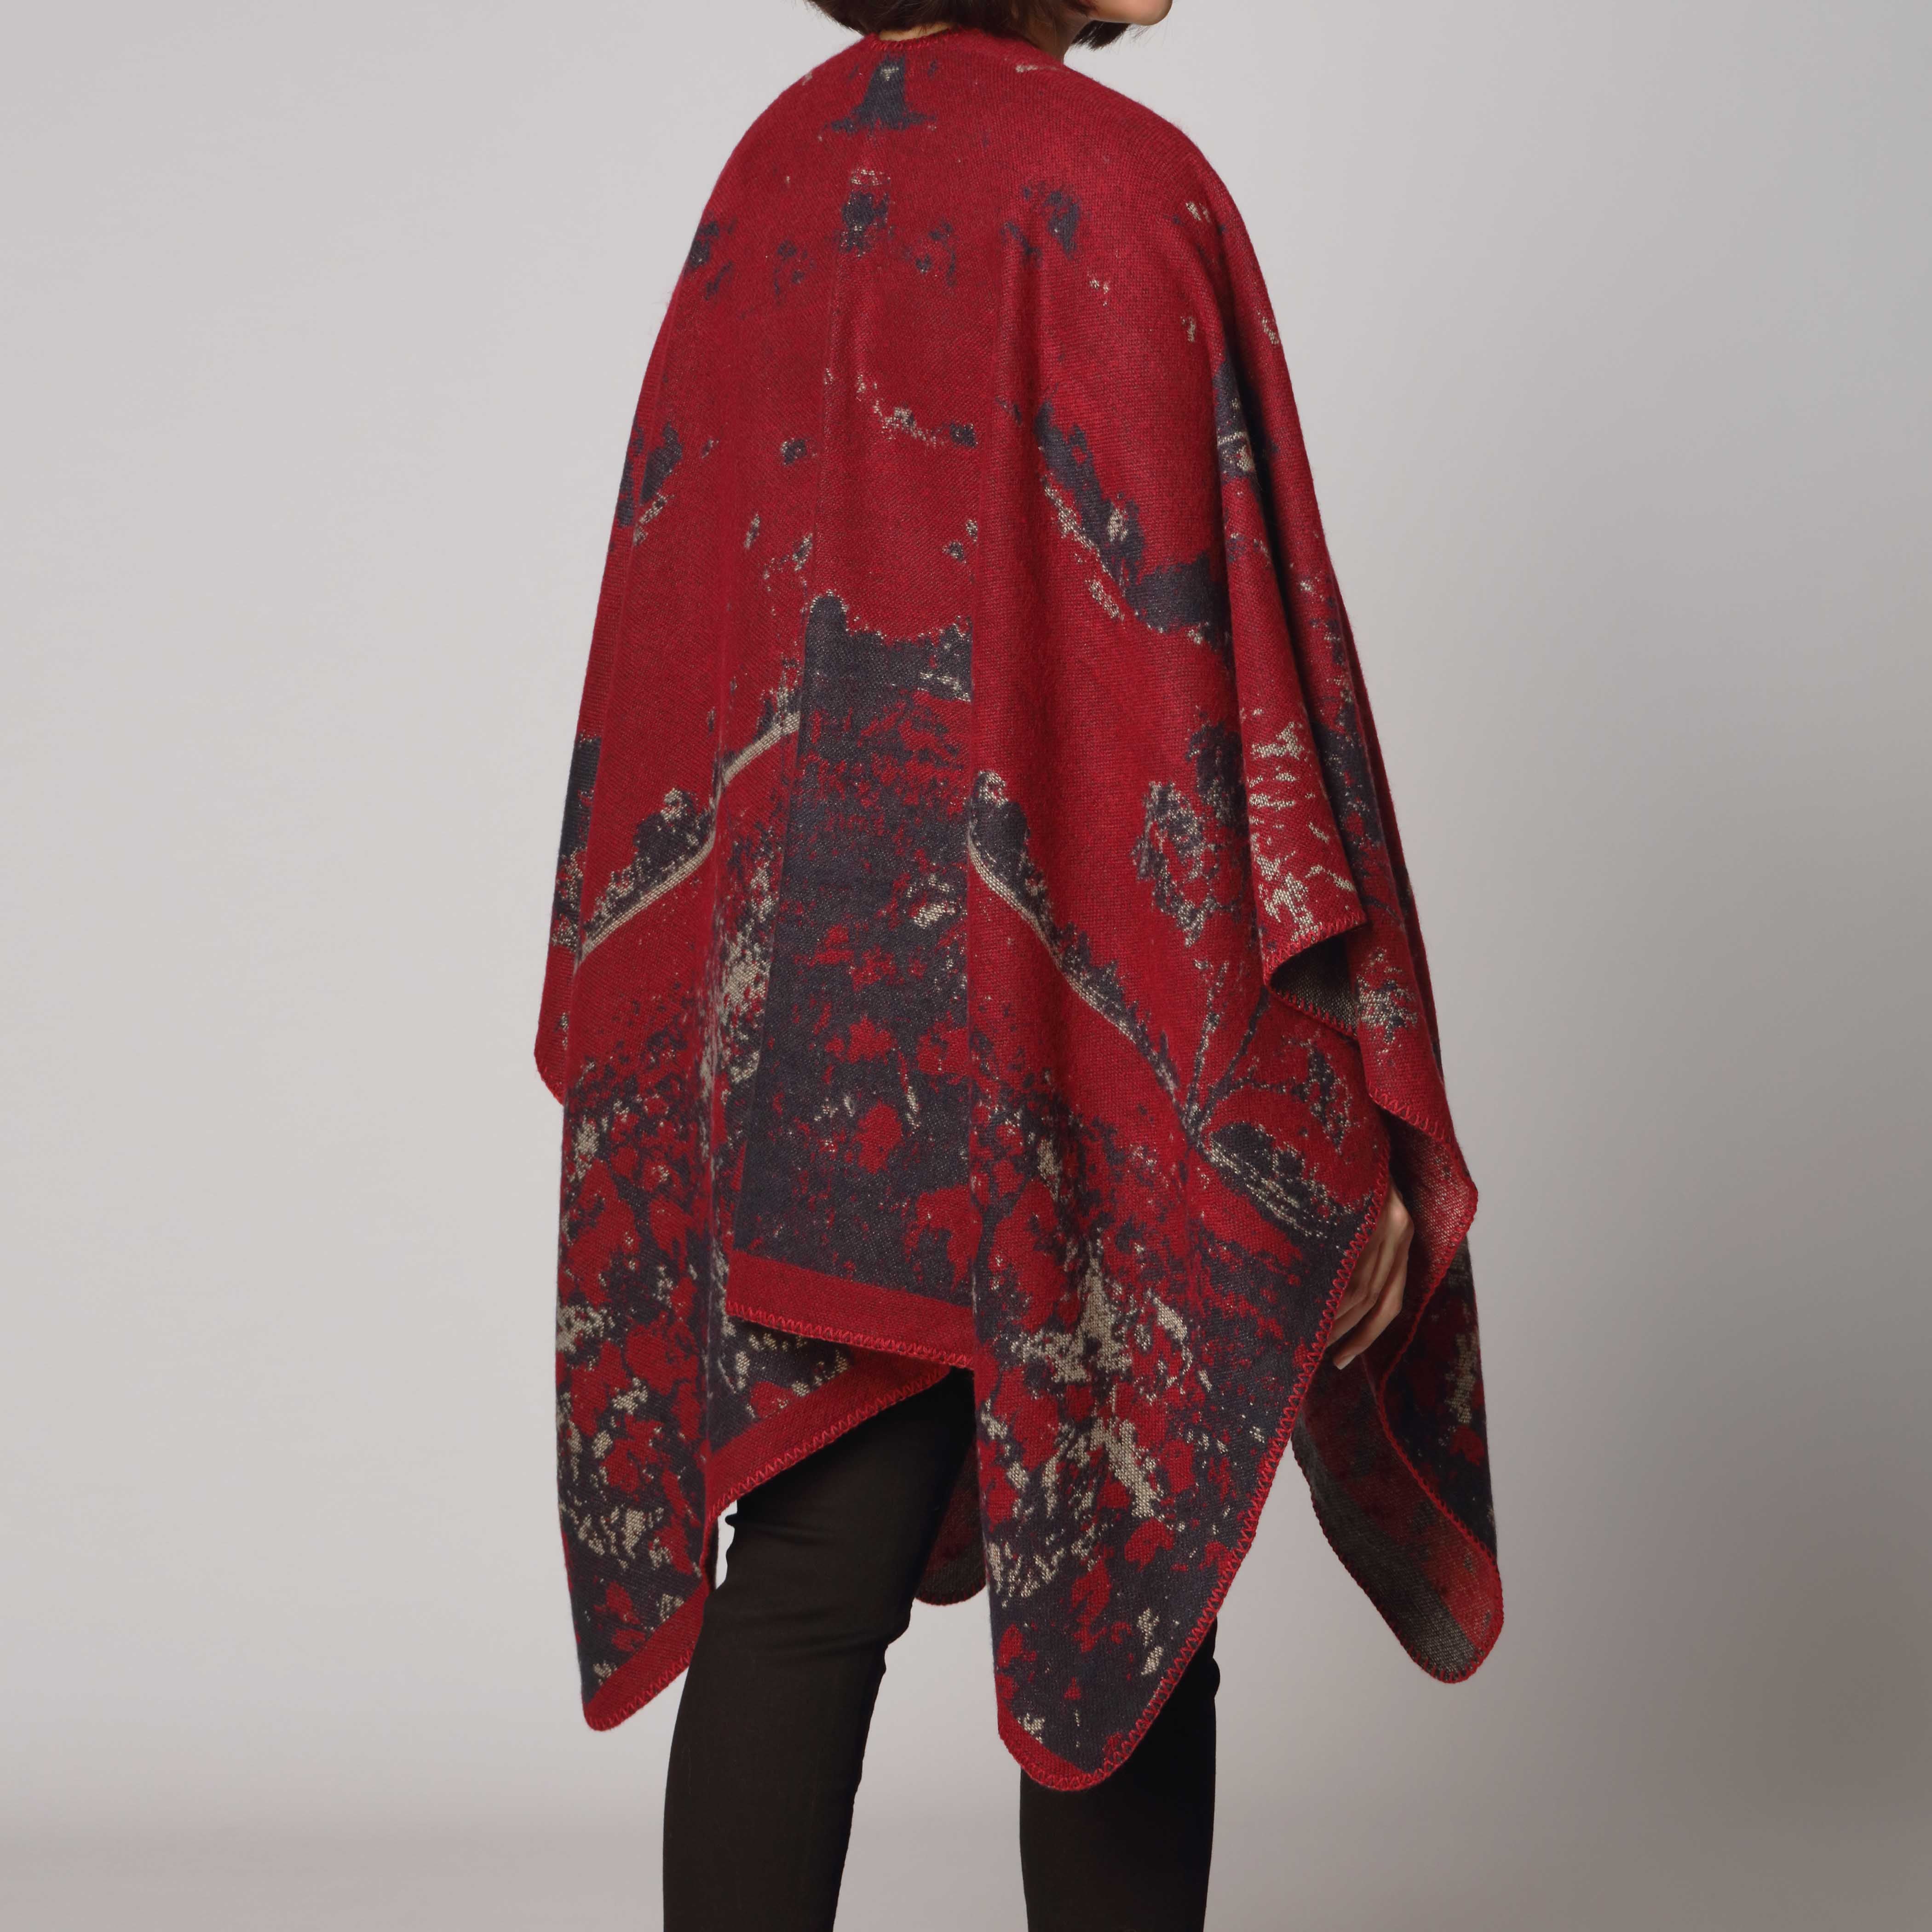 Red Cape Shawl PW2813